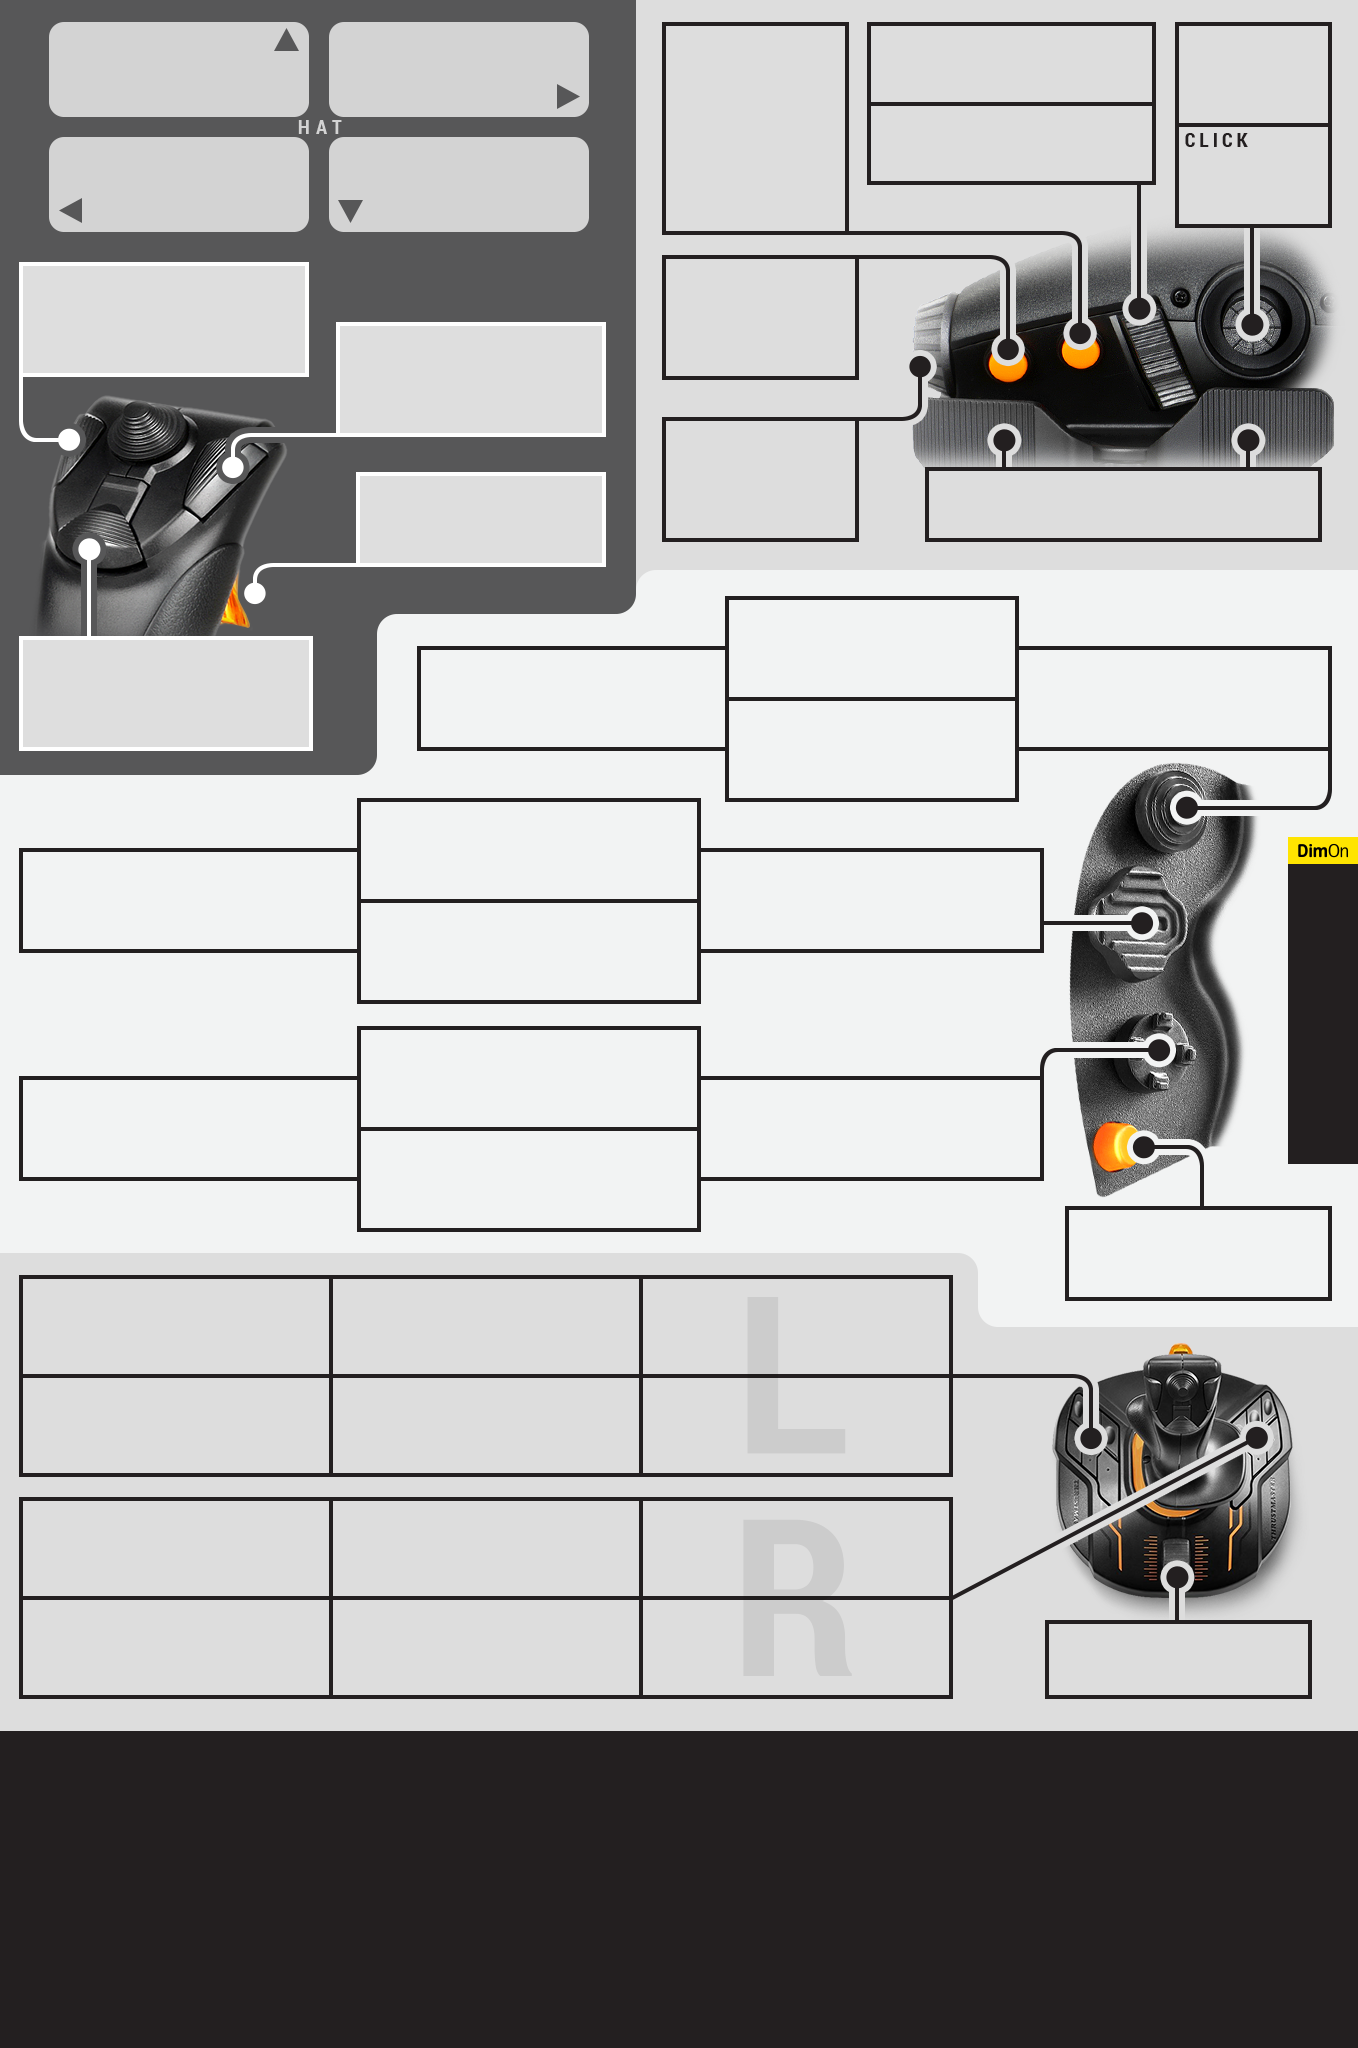 Thrustmaster T.16000M FCS Blank Profile Template